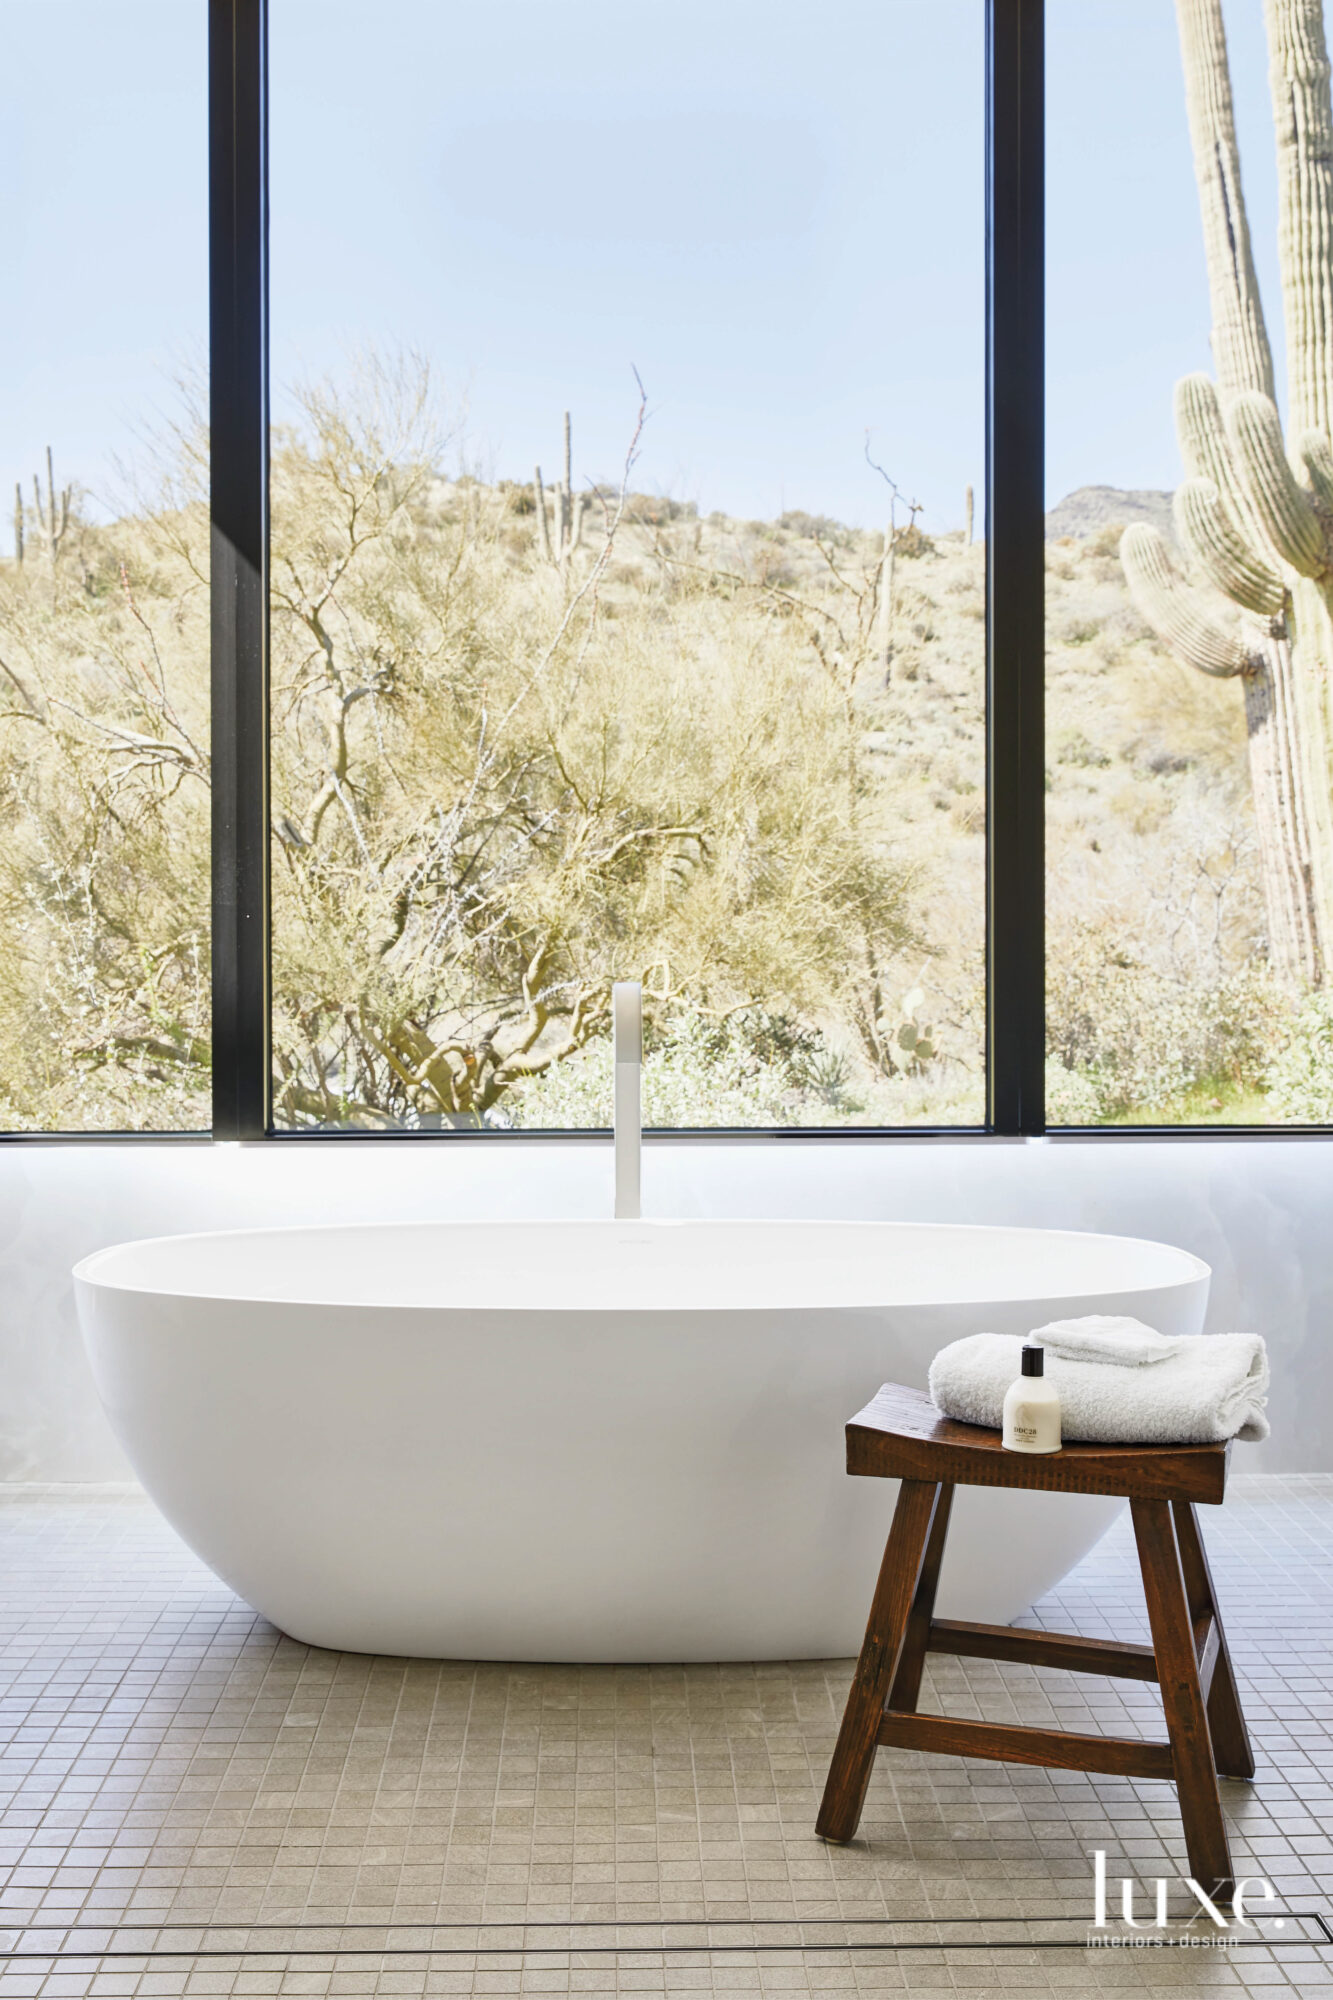 The master bathroom has a stand-alone tub that looks out on the desert.